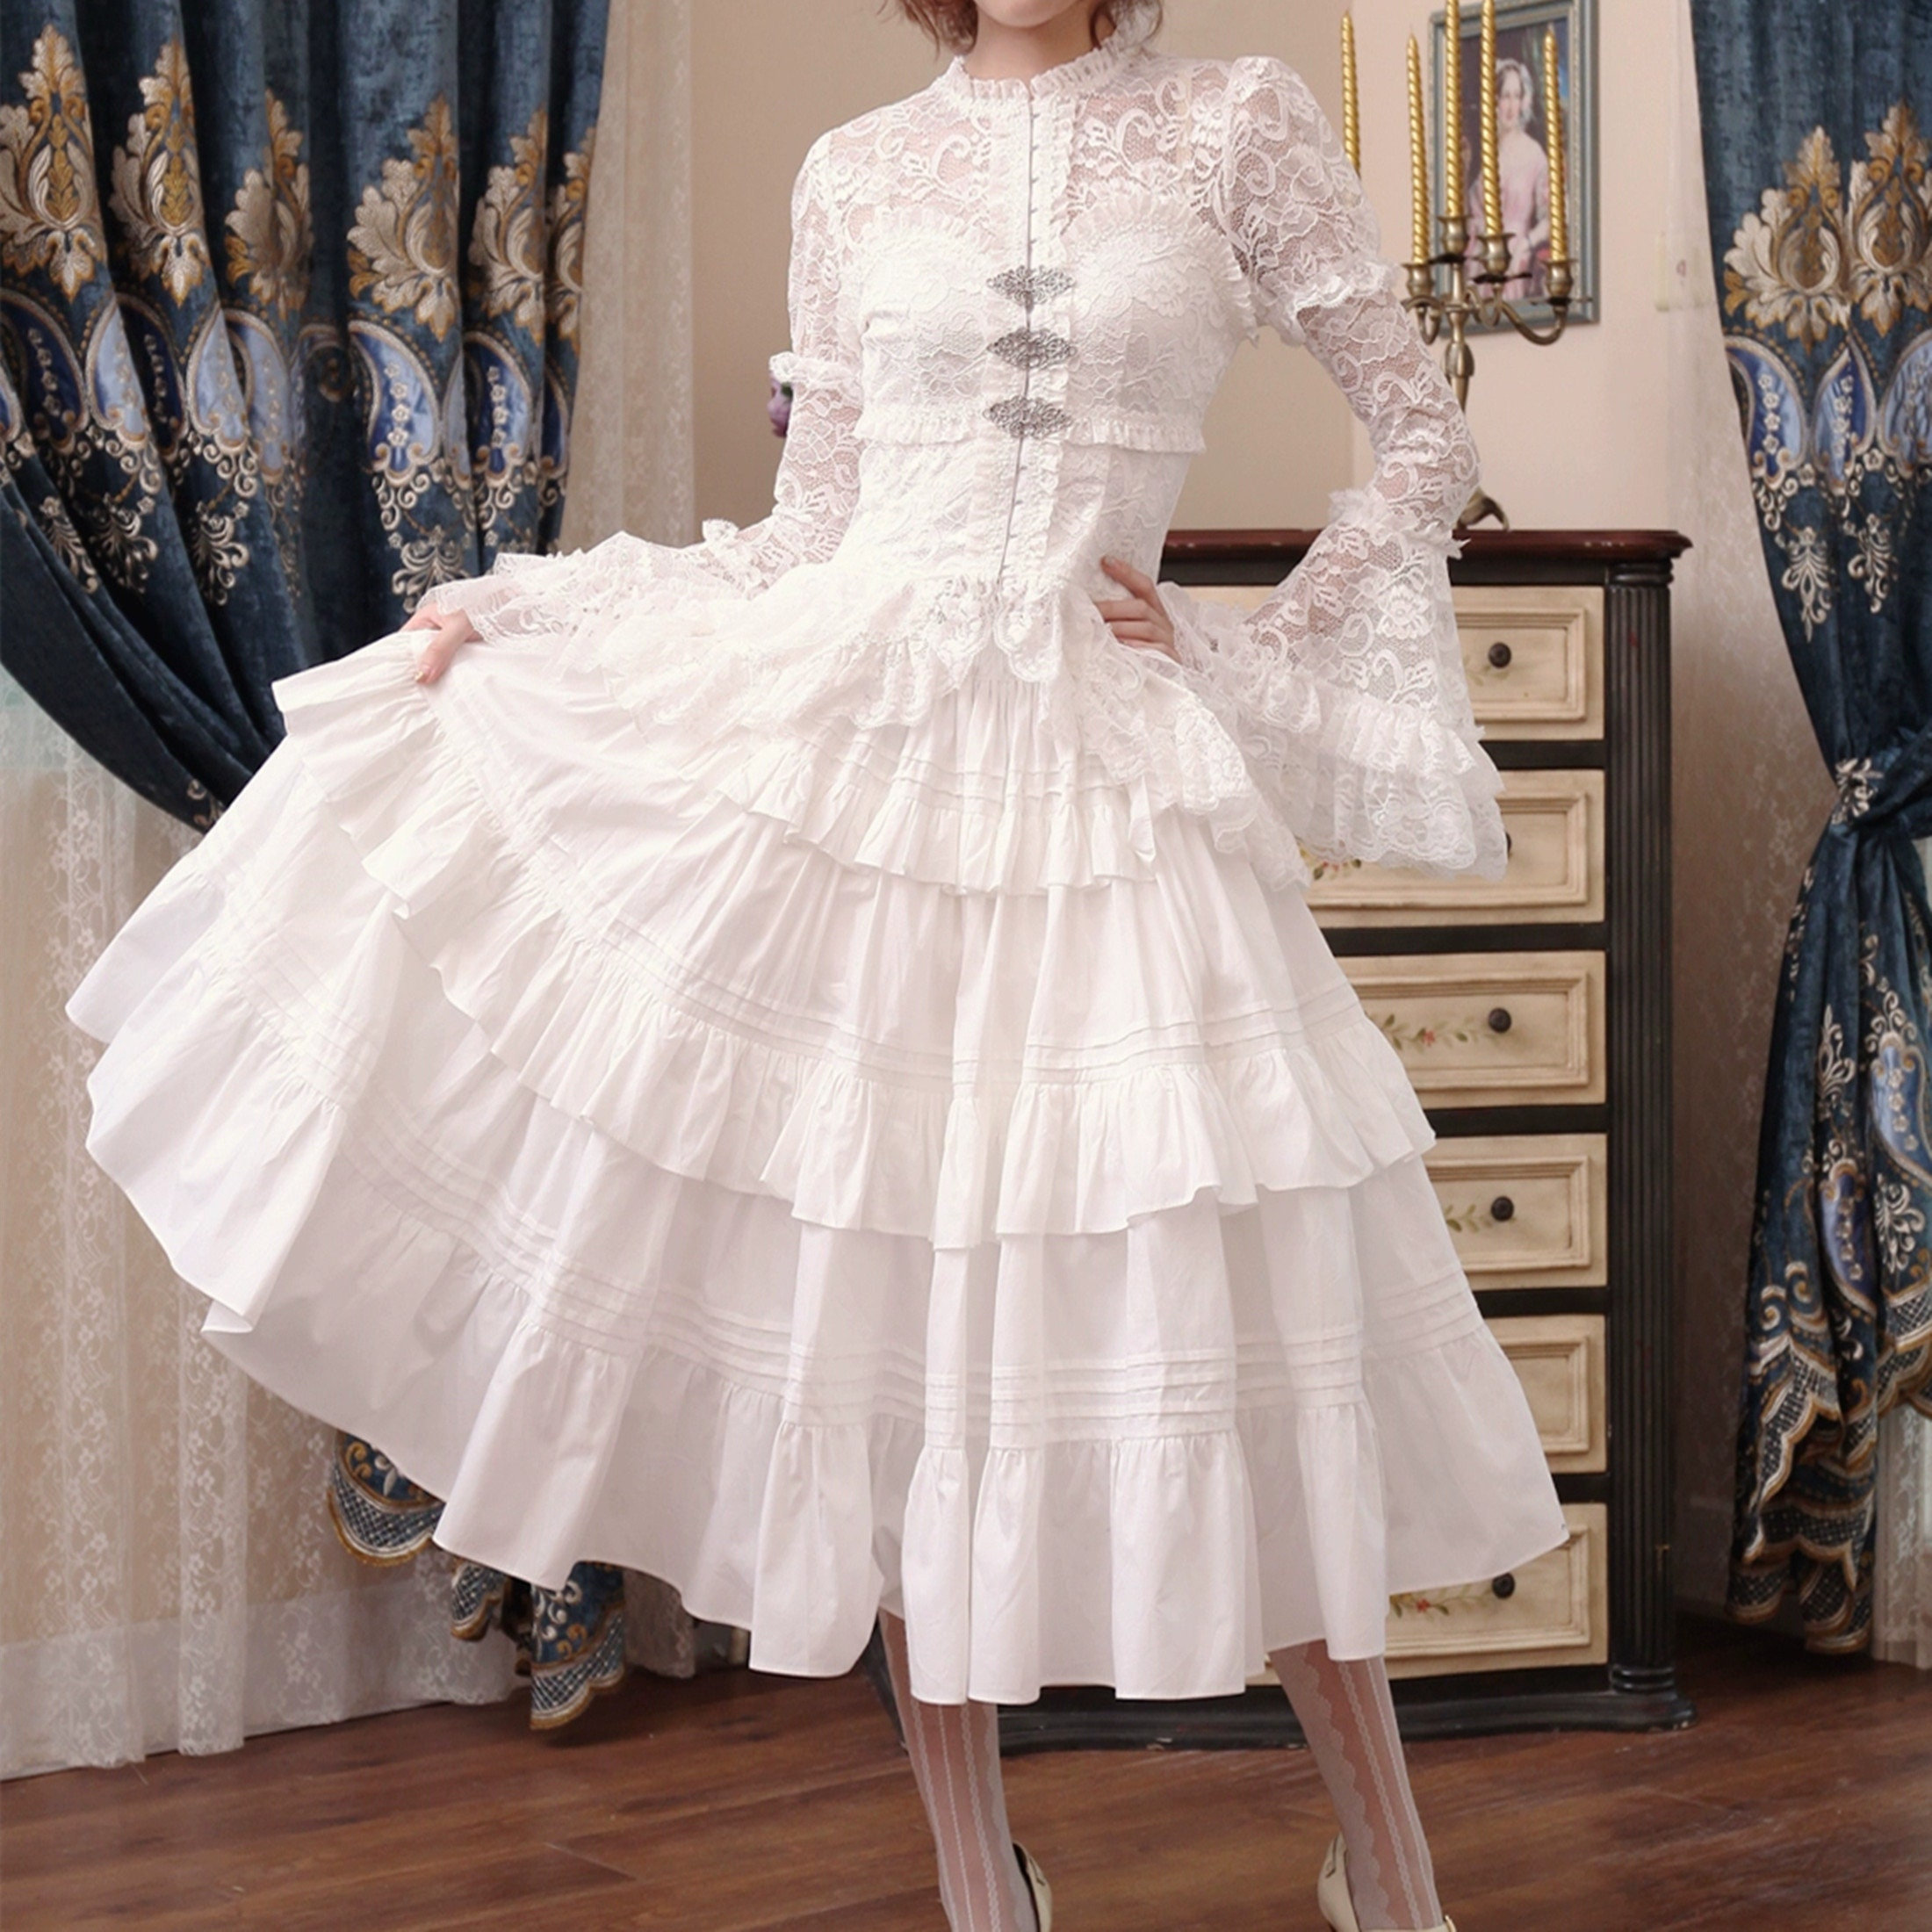 White Lace Shirt with Ruffle Skirt Vintage Tea Party Dress